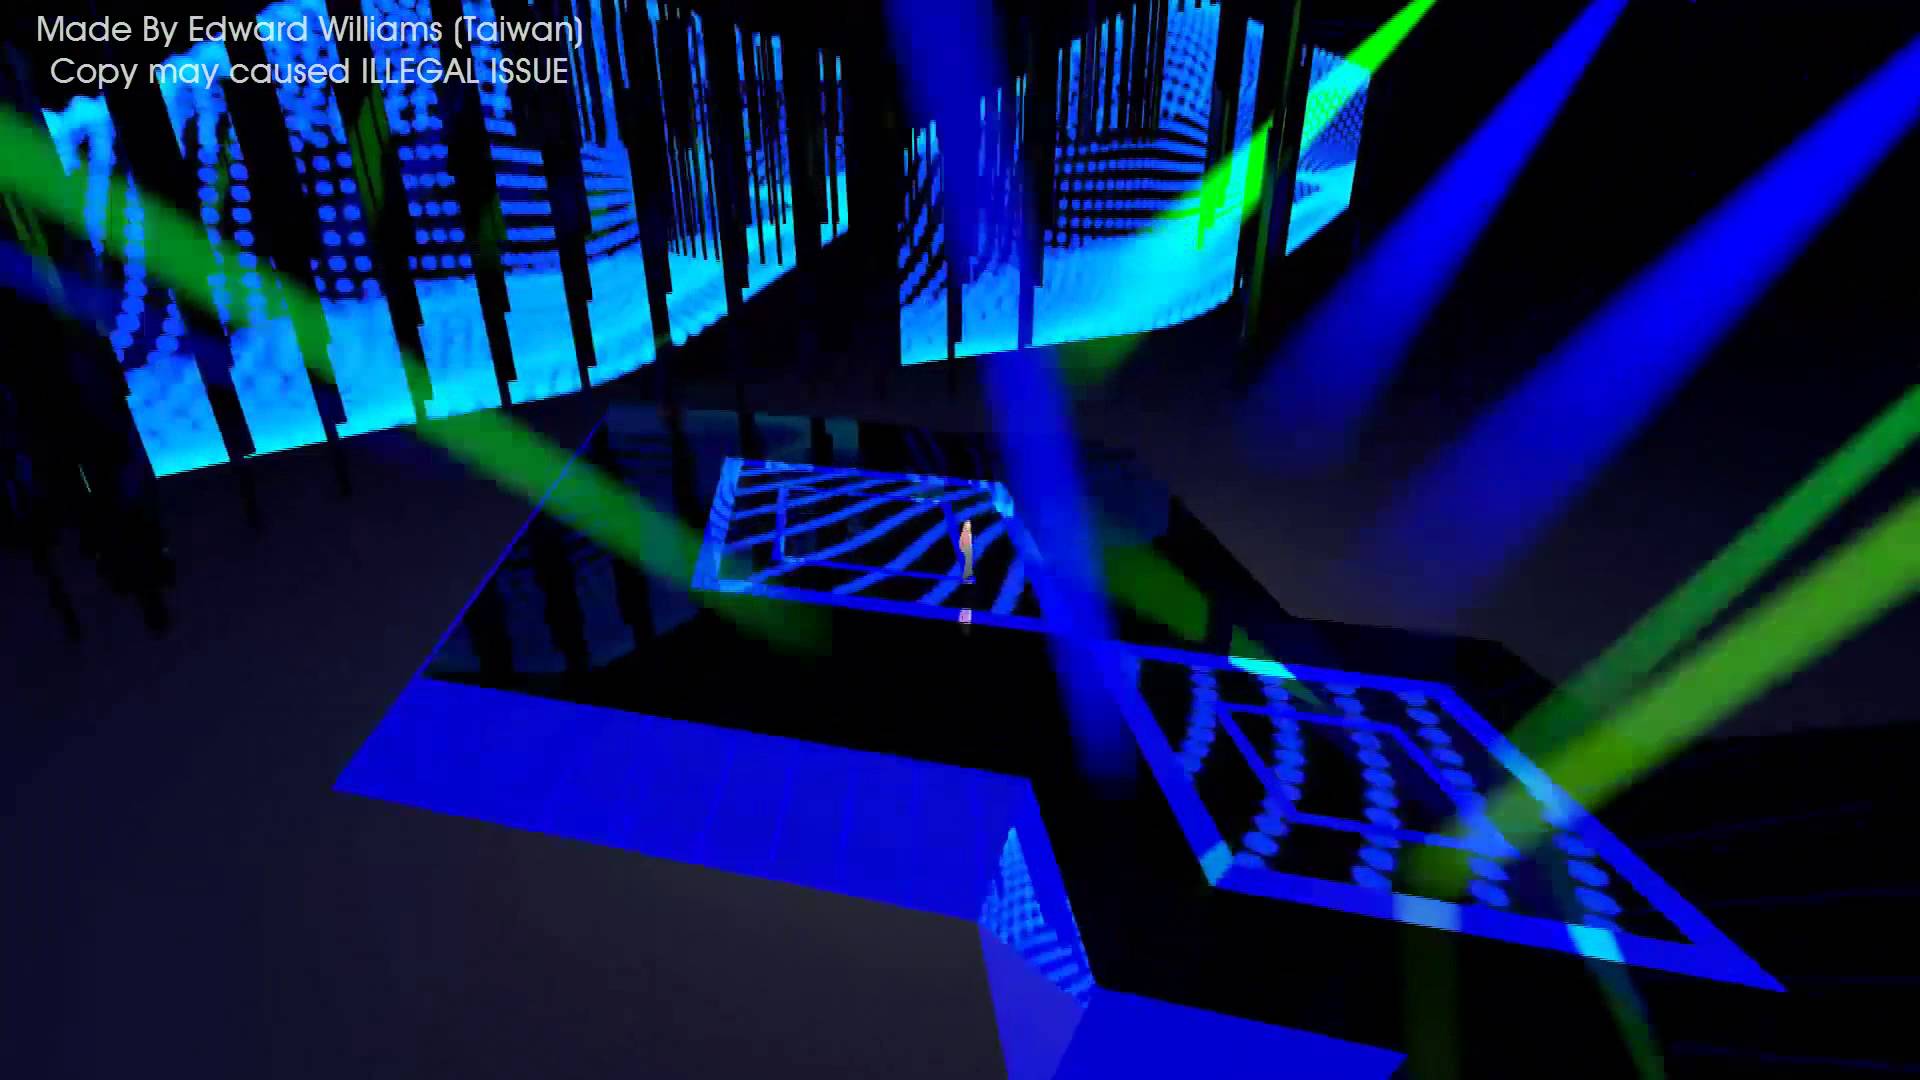 Eurovision Song Contest 2016 Stage Design